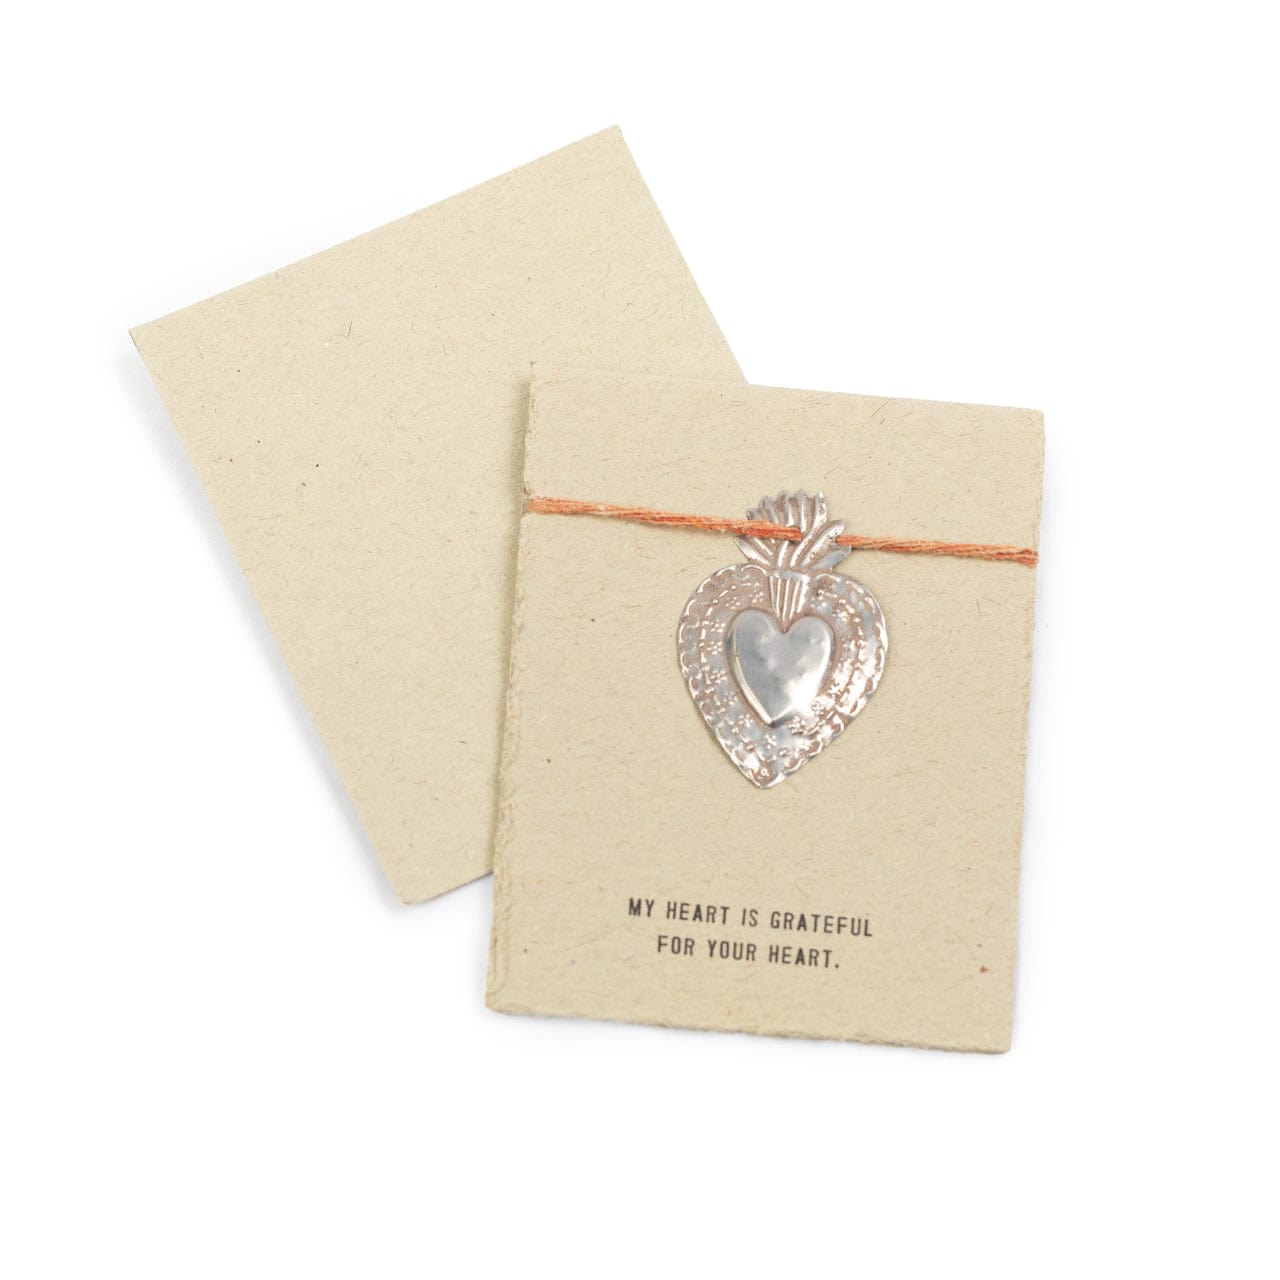 Milagro Heart Cards Sugarboo Designs Greeting Card grateful